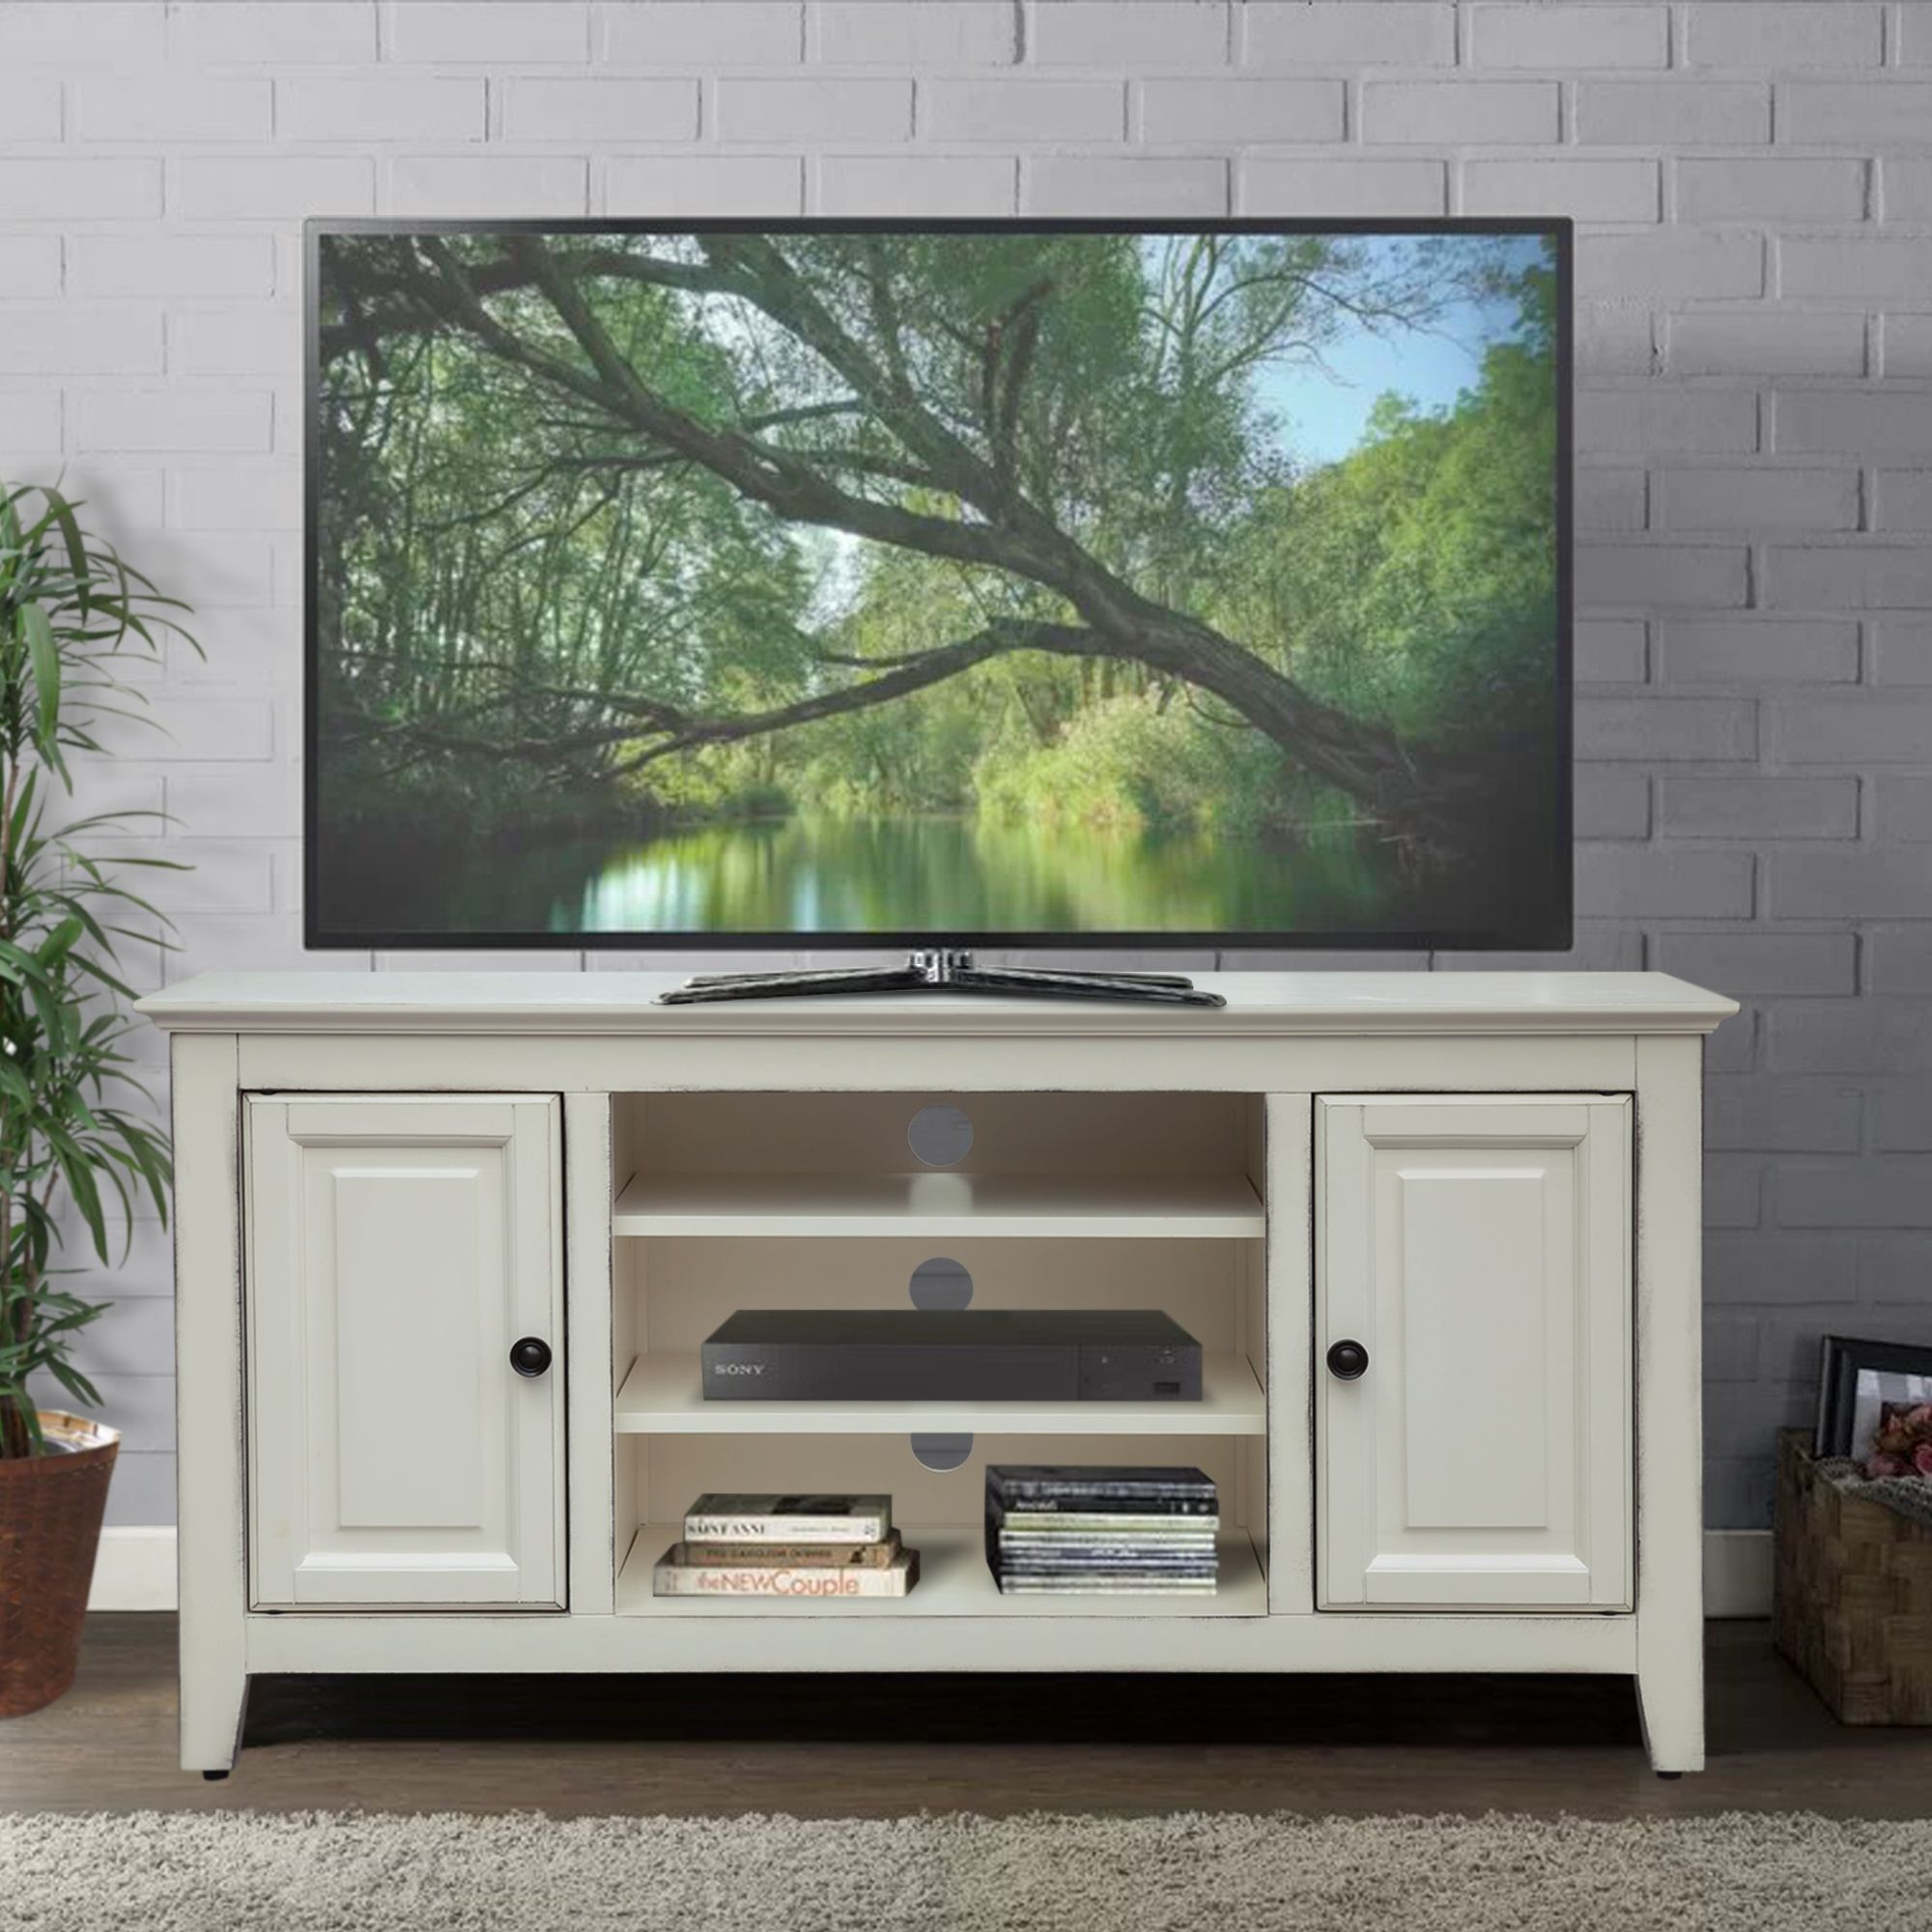 48" Wood Grain Tv Stand In Antique White – Walmart With Regard To White Wooden Tv Stands (View 2 of 15)